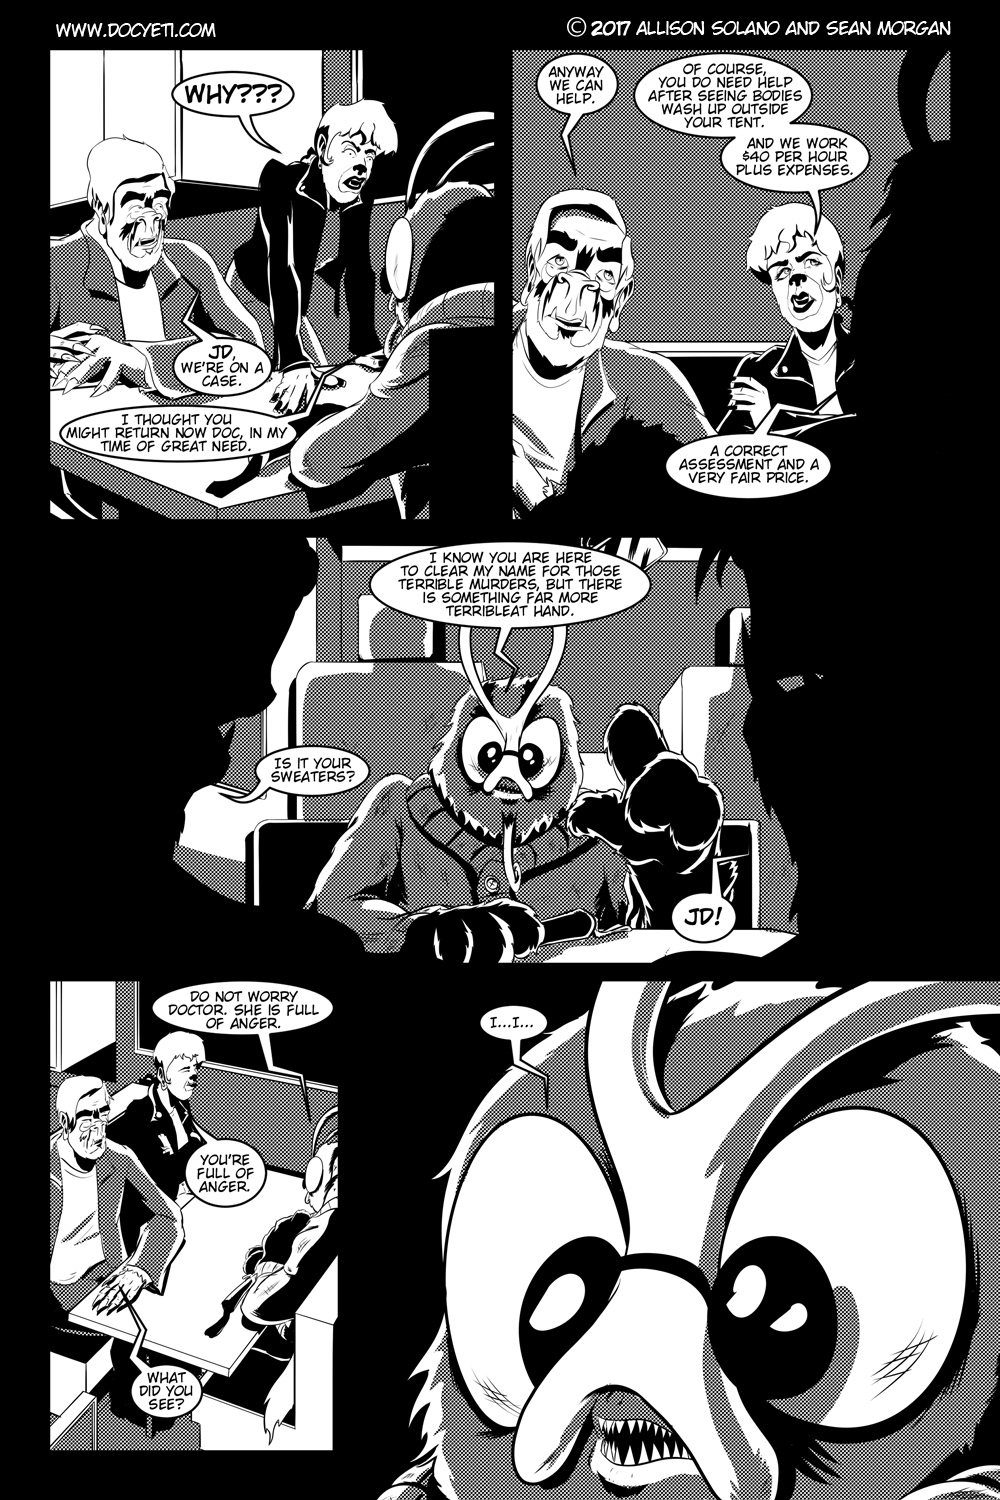 Flight of the Mothman! Issue 1 page 19